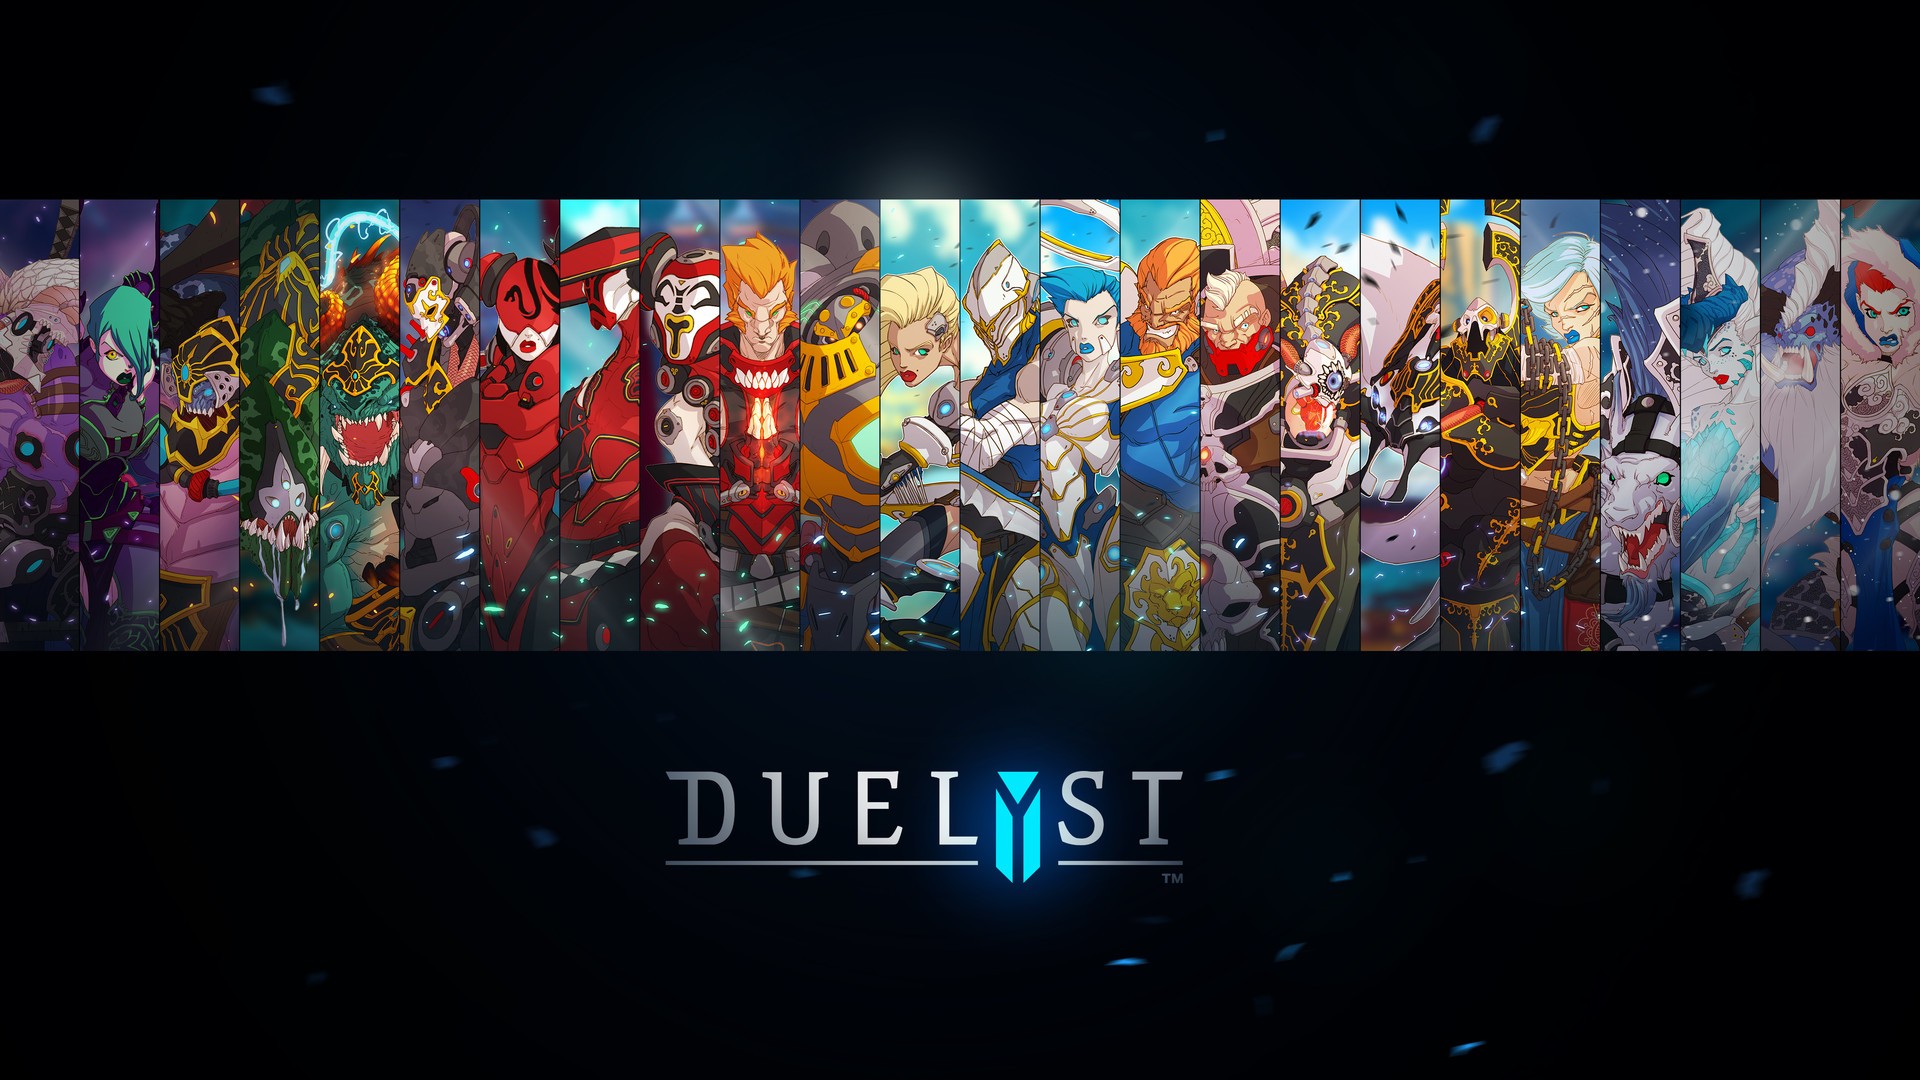 General 1920x1080 digital art artwork Duelyst video games concept art collage PC gaming video game characters